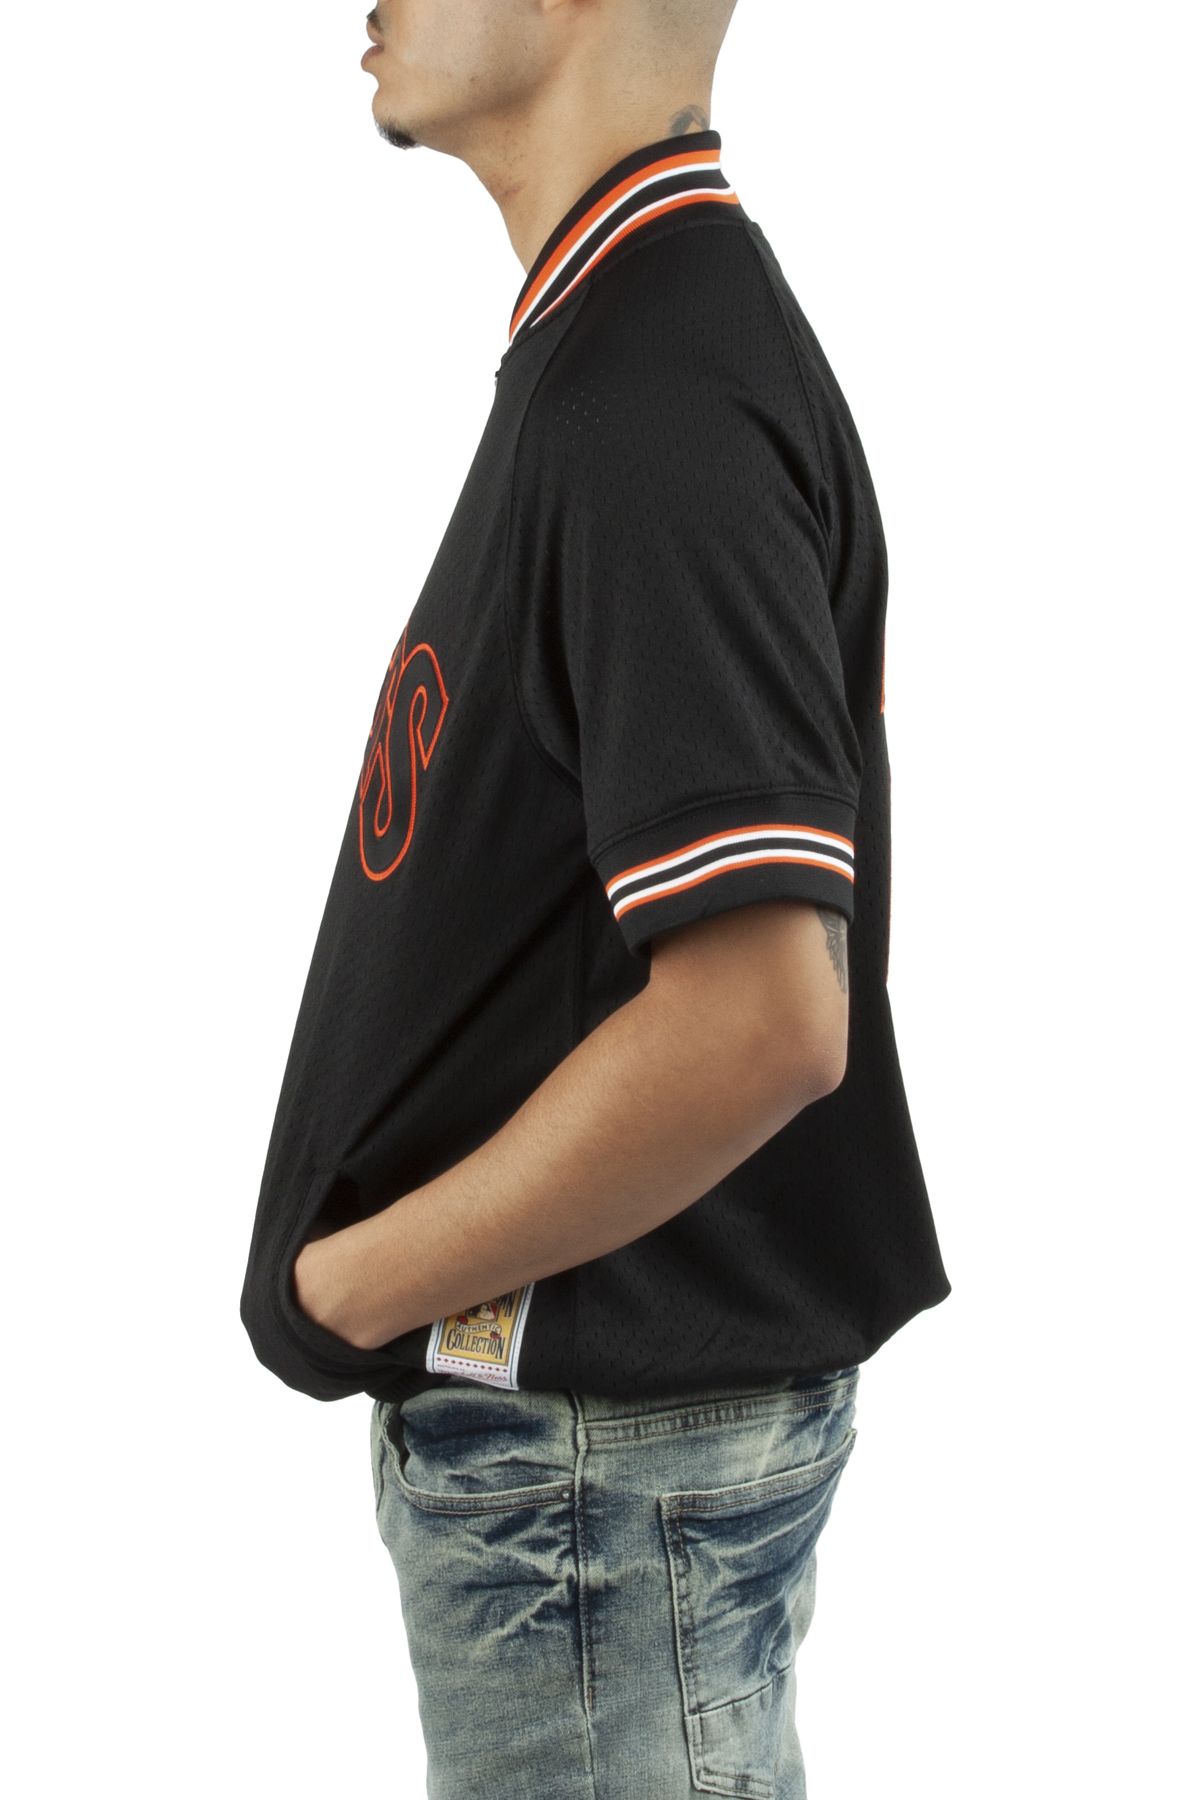 Will Clark San Francisco Giants Nike Cooperstown Collection Name & Number T- Shirt - Orange